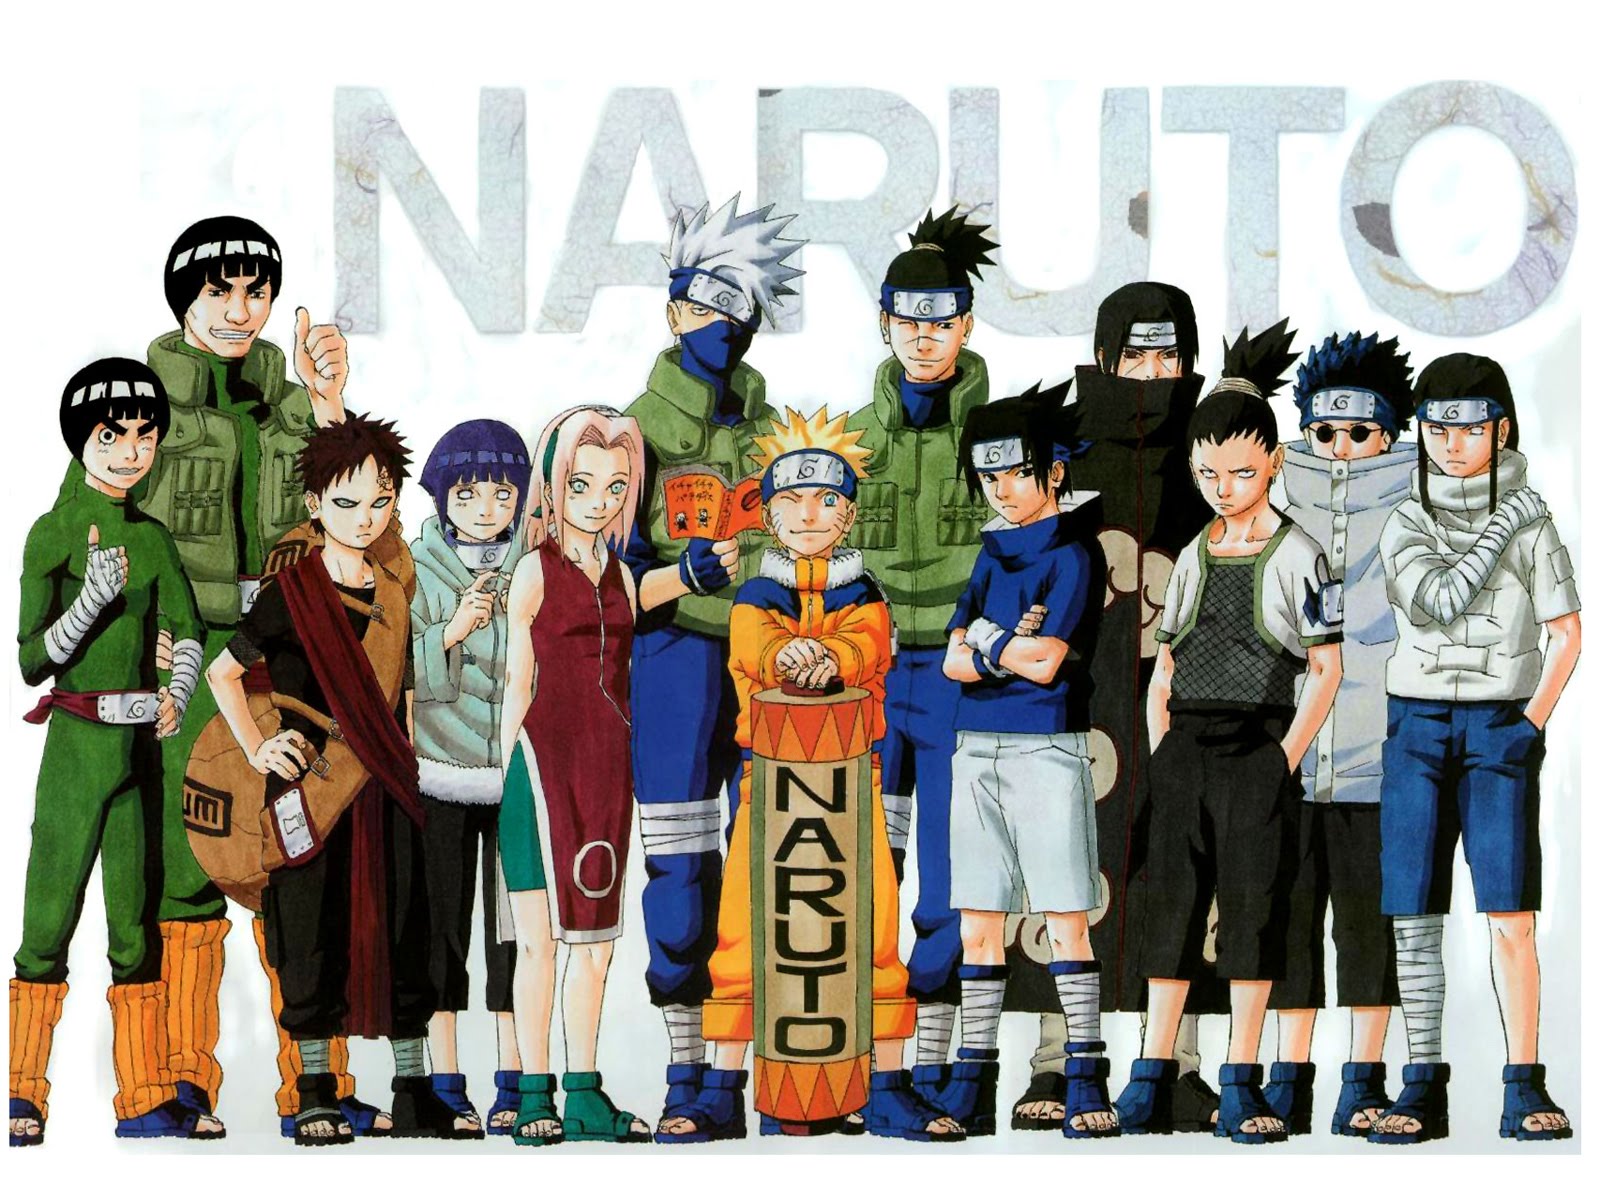 All Naruto Character Anime Wallpaper Collections